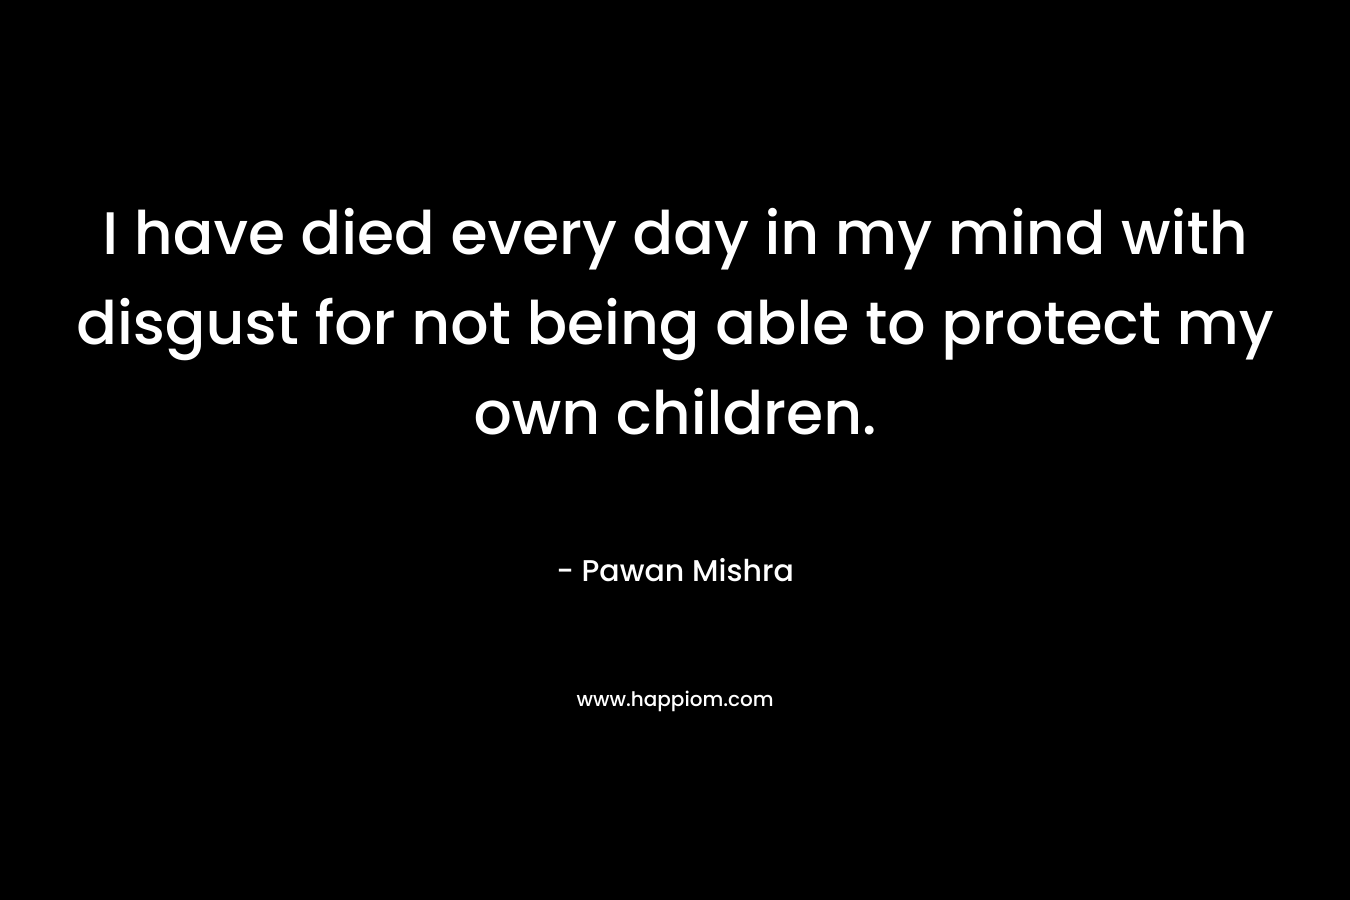 I have died every day in my mind with disgust for not being able to protect my own children.